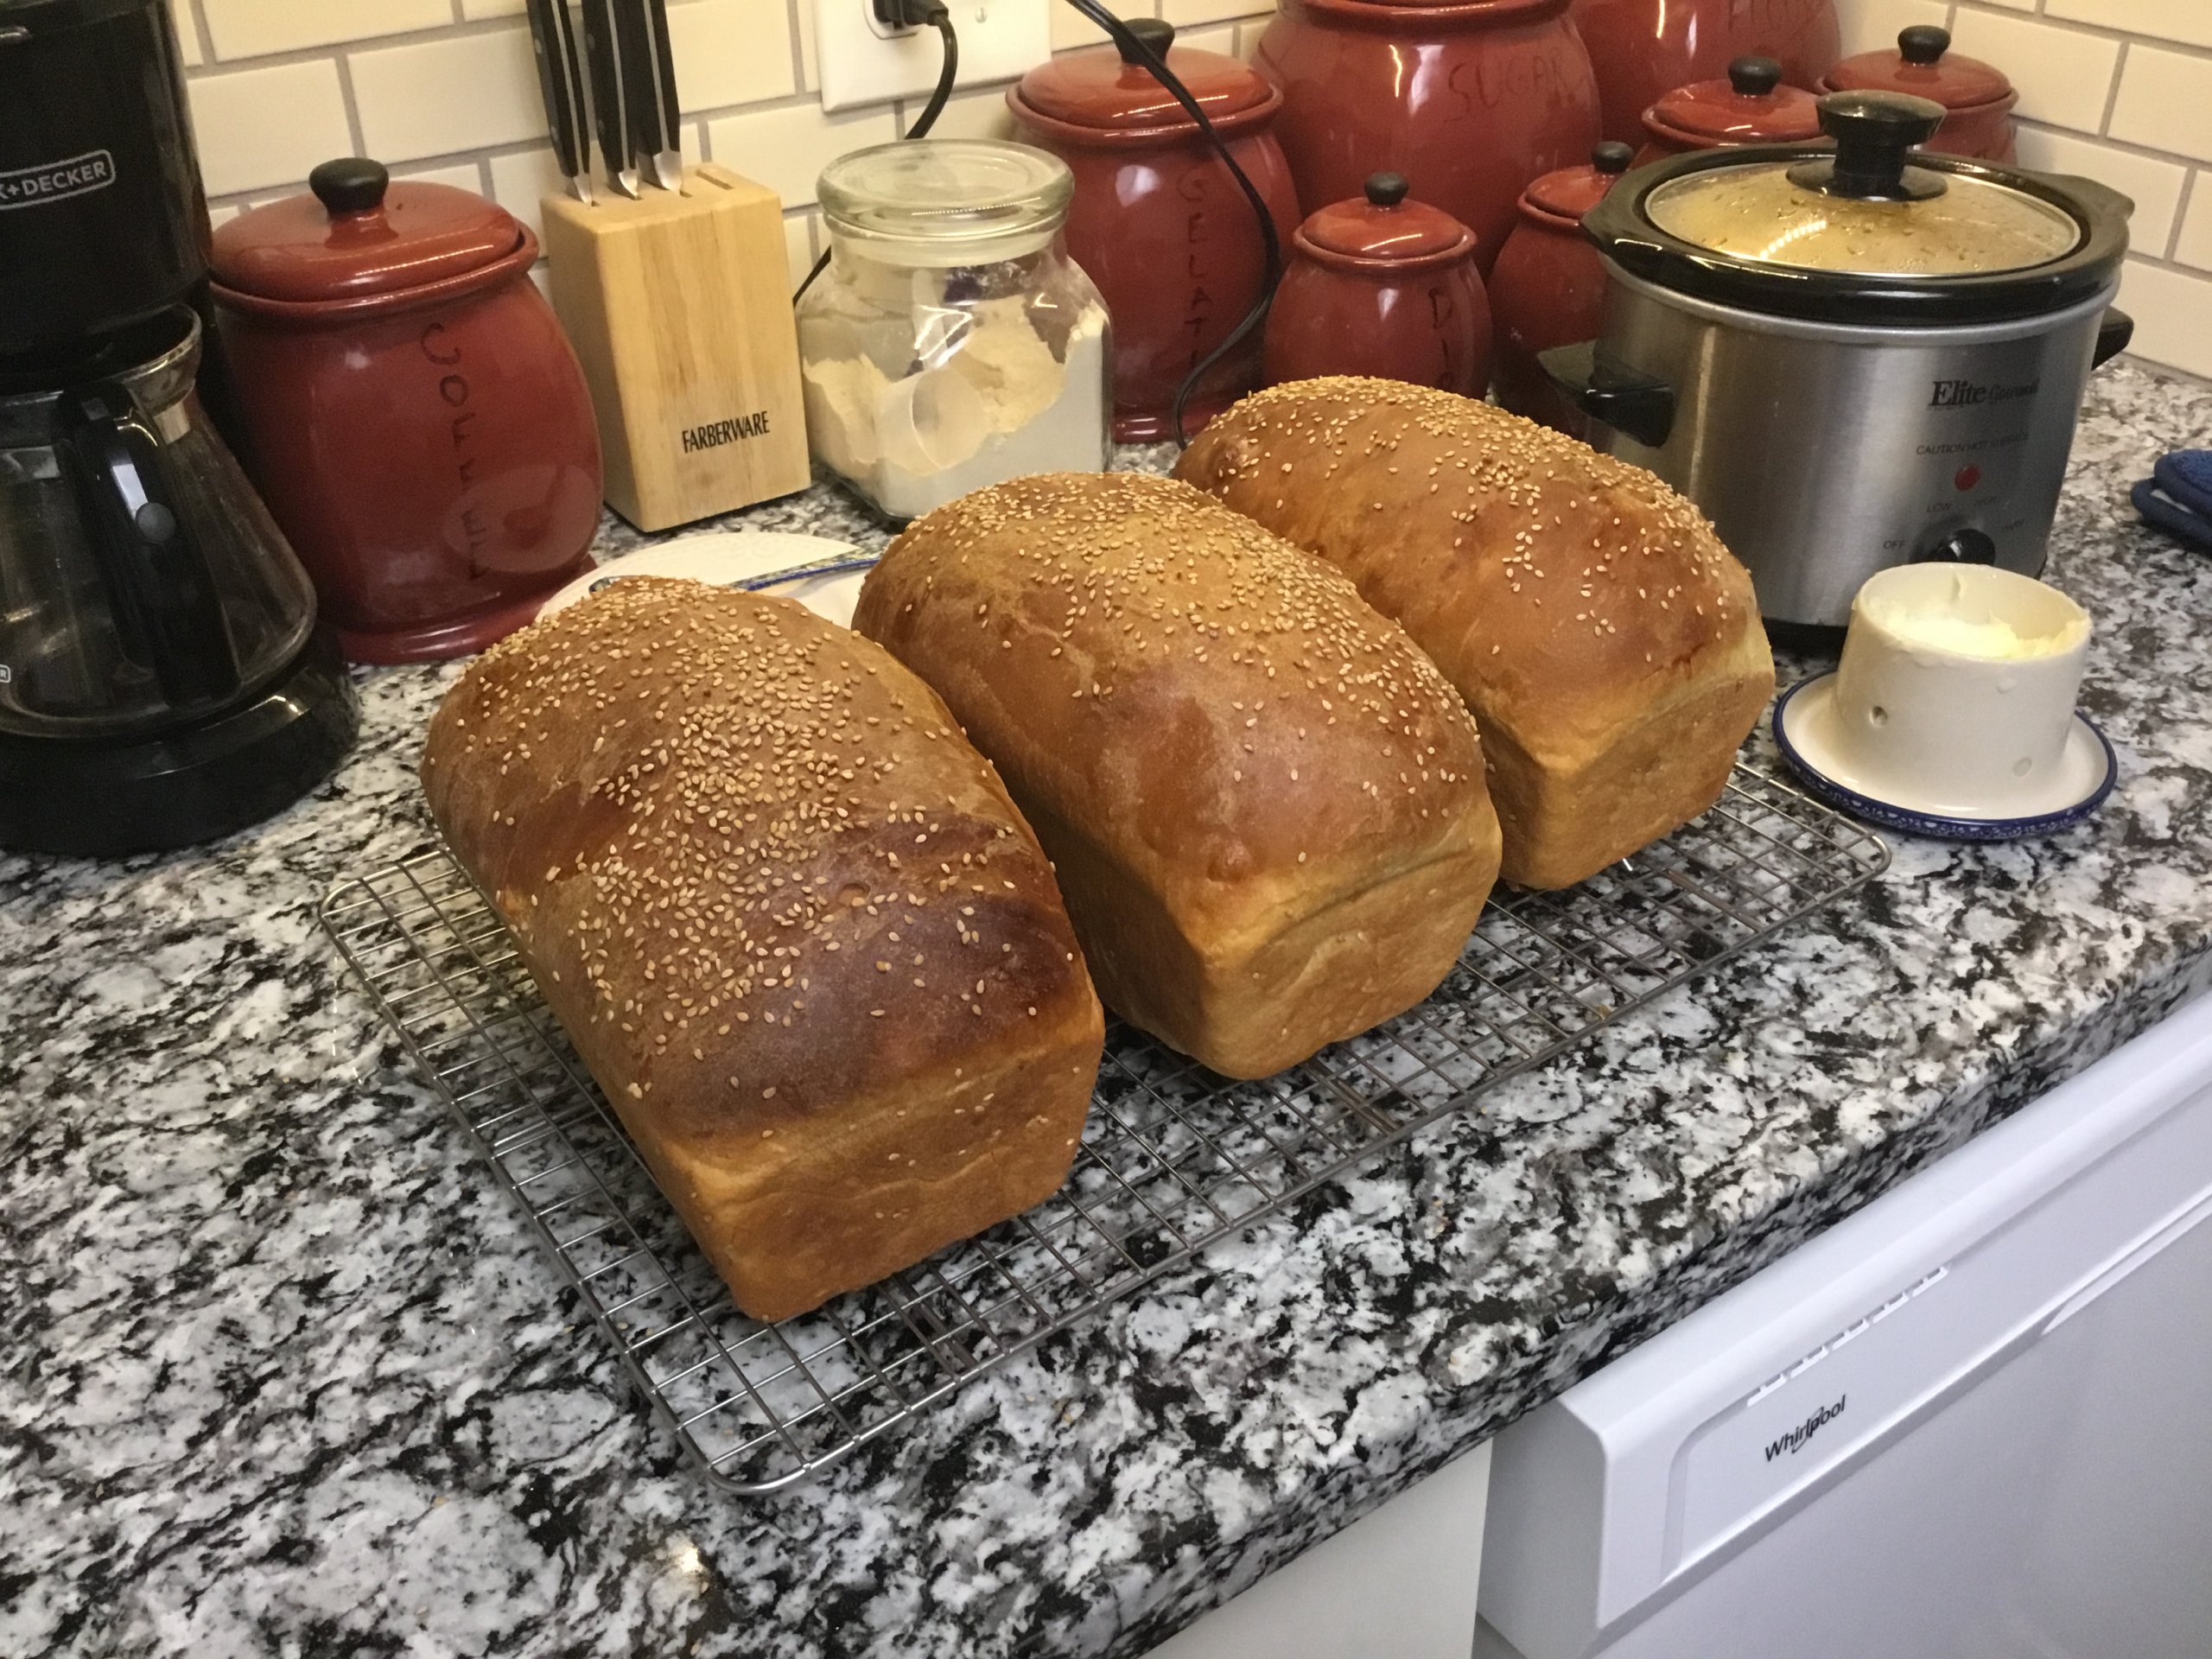 White bread with sesame seeds